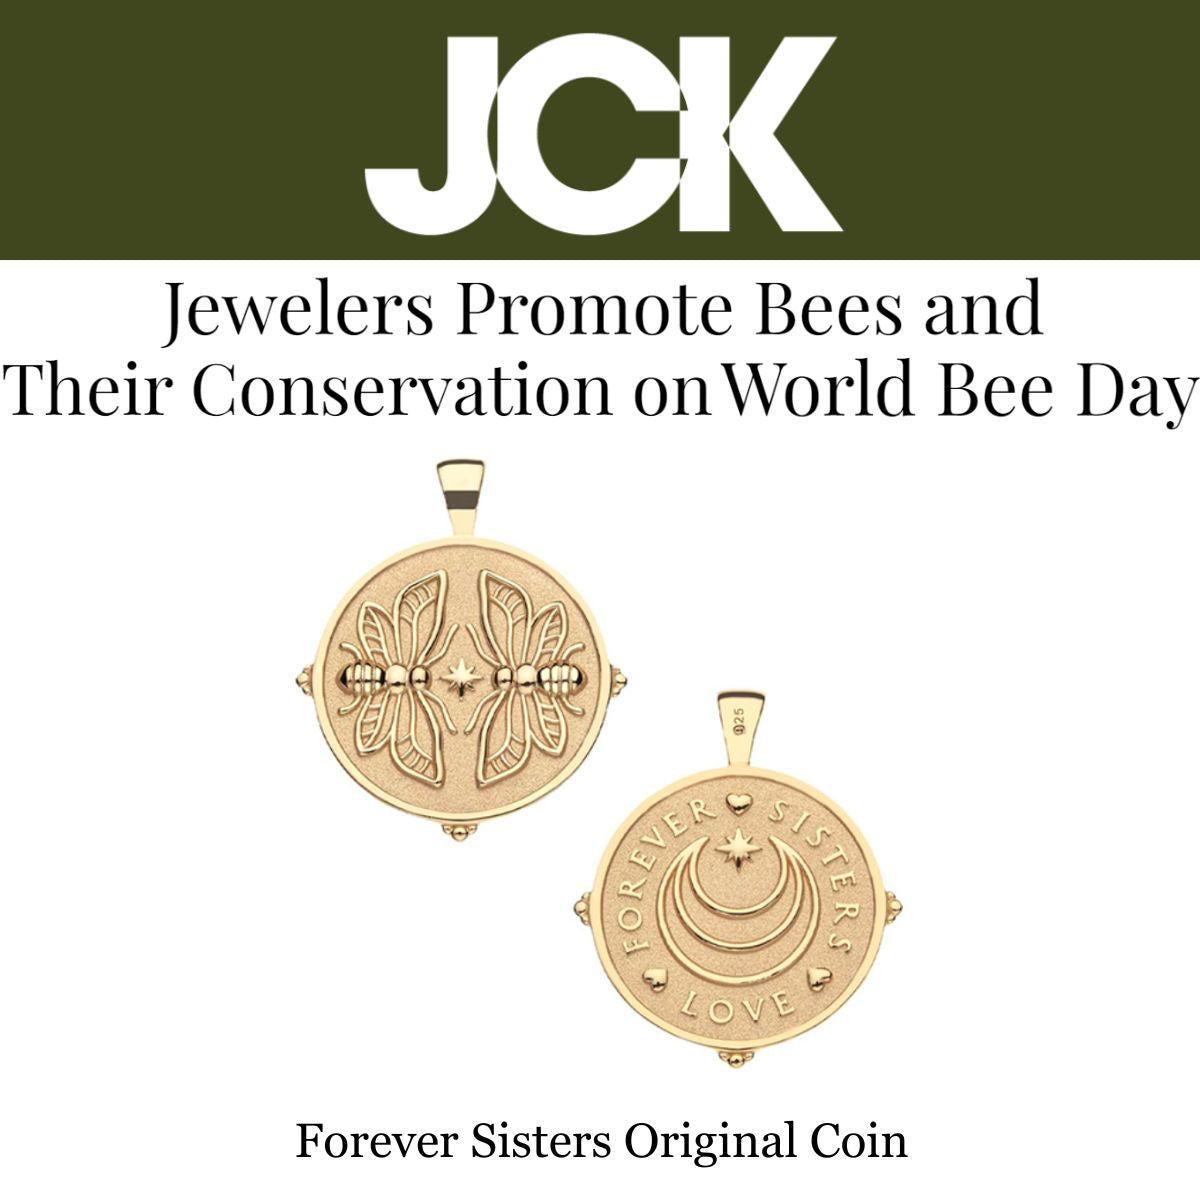 Press Highlight: JCK's "Jewelers Promote Bees and their Conservation on World Bee Day"